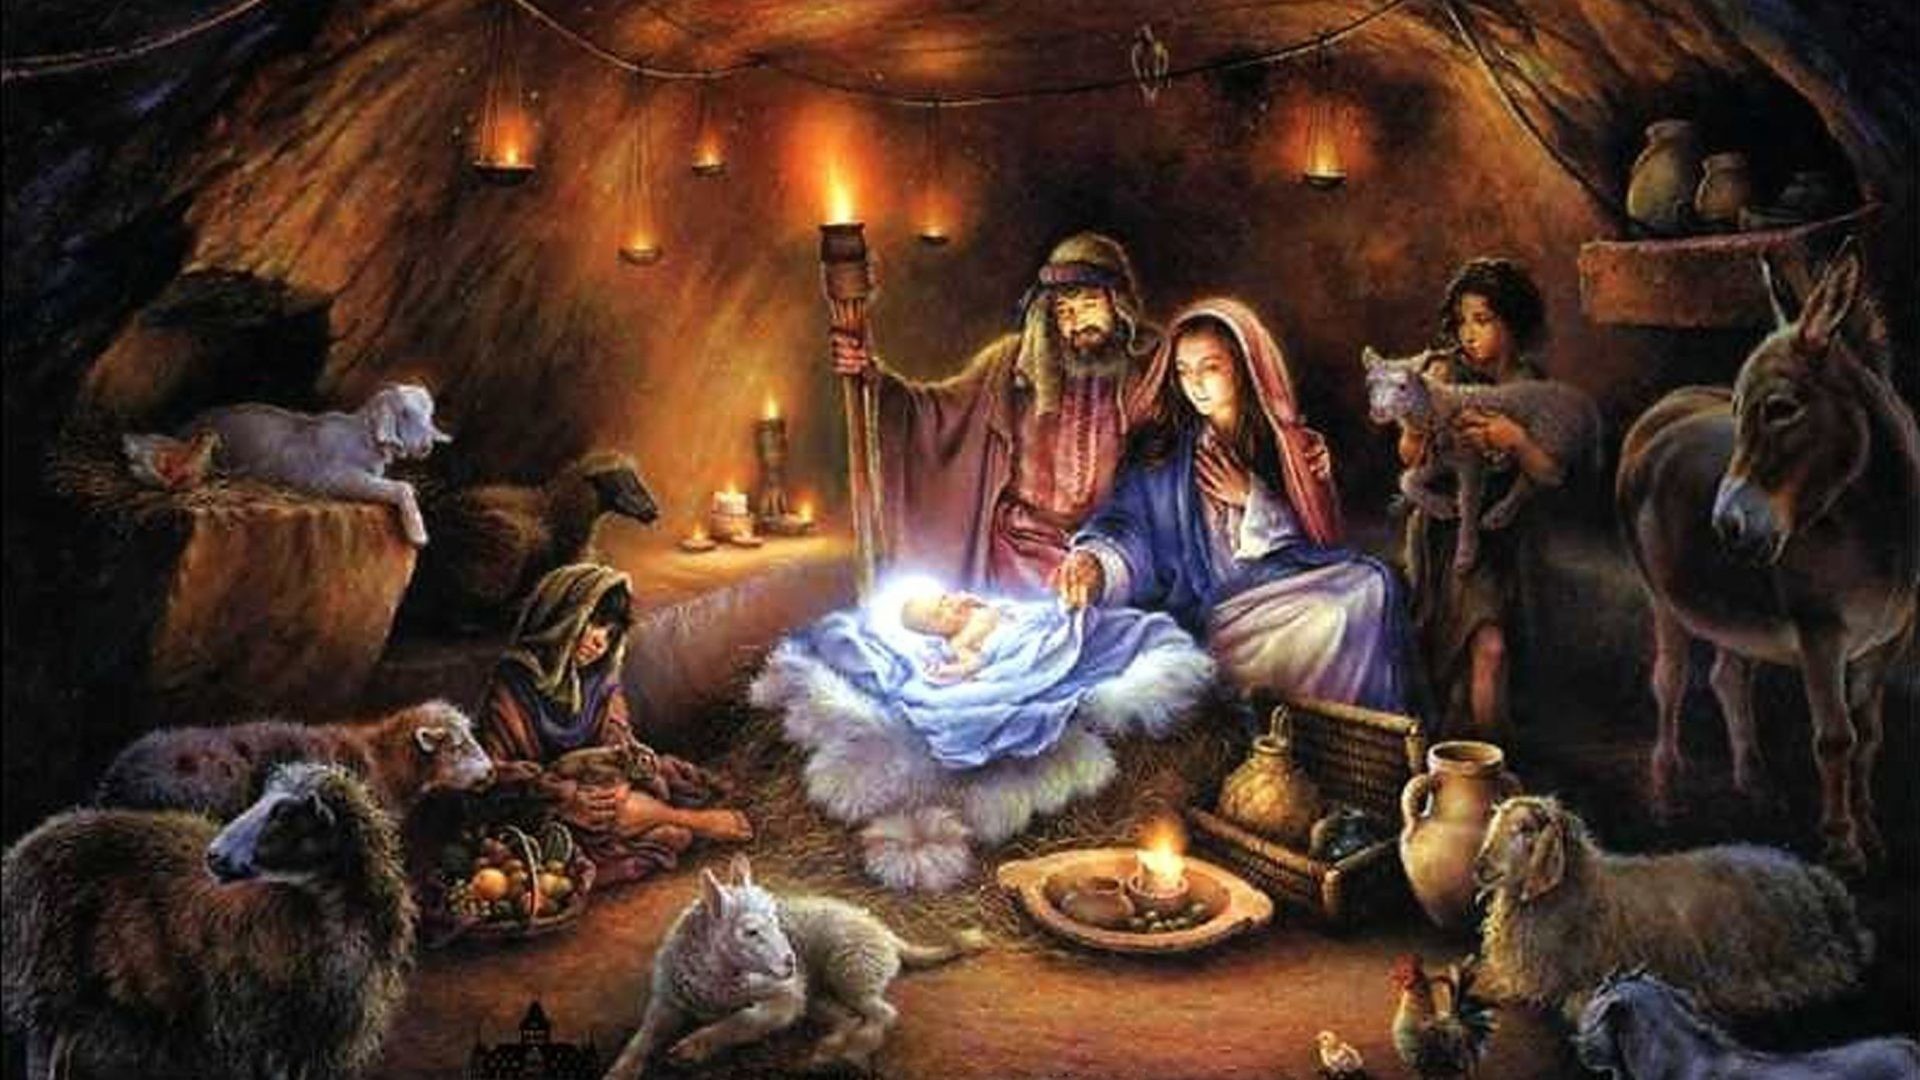 1920x1080  Religious - BABY BORN BARN MOTHER JESUS MARY Cool Wallpapers for  HD 16:9 High